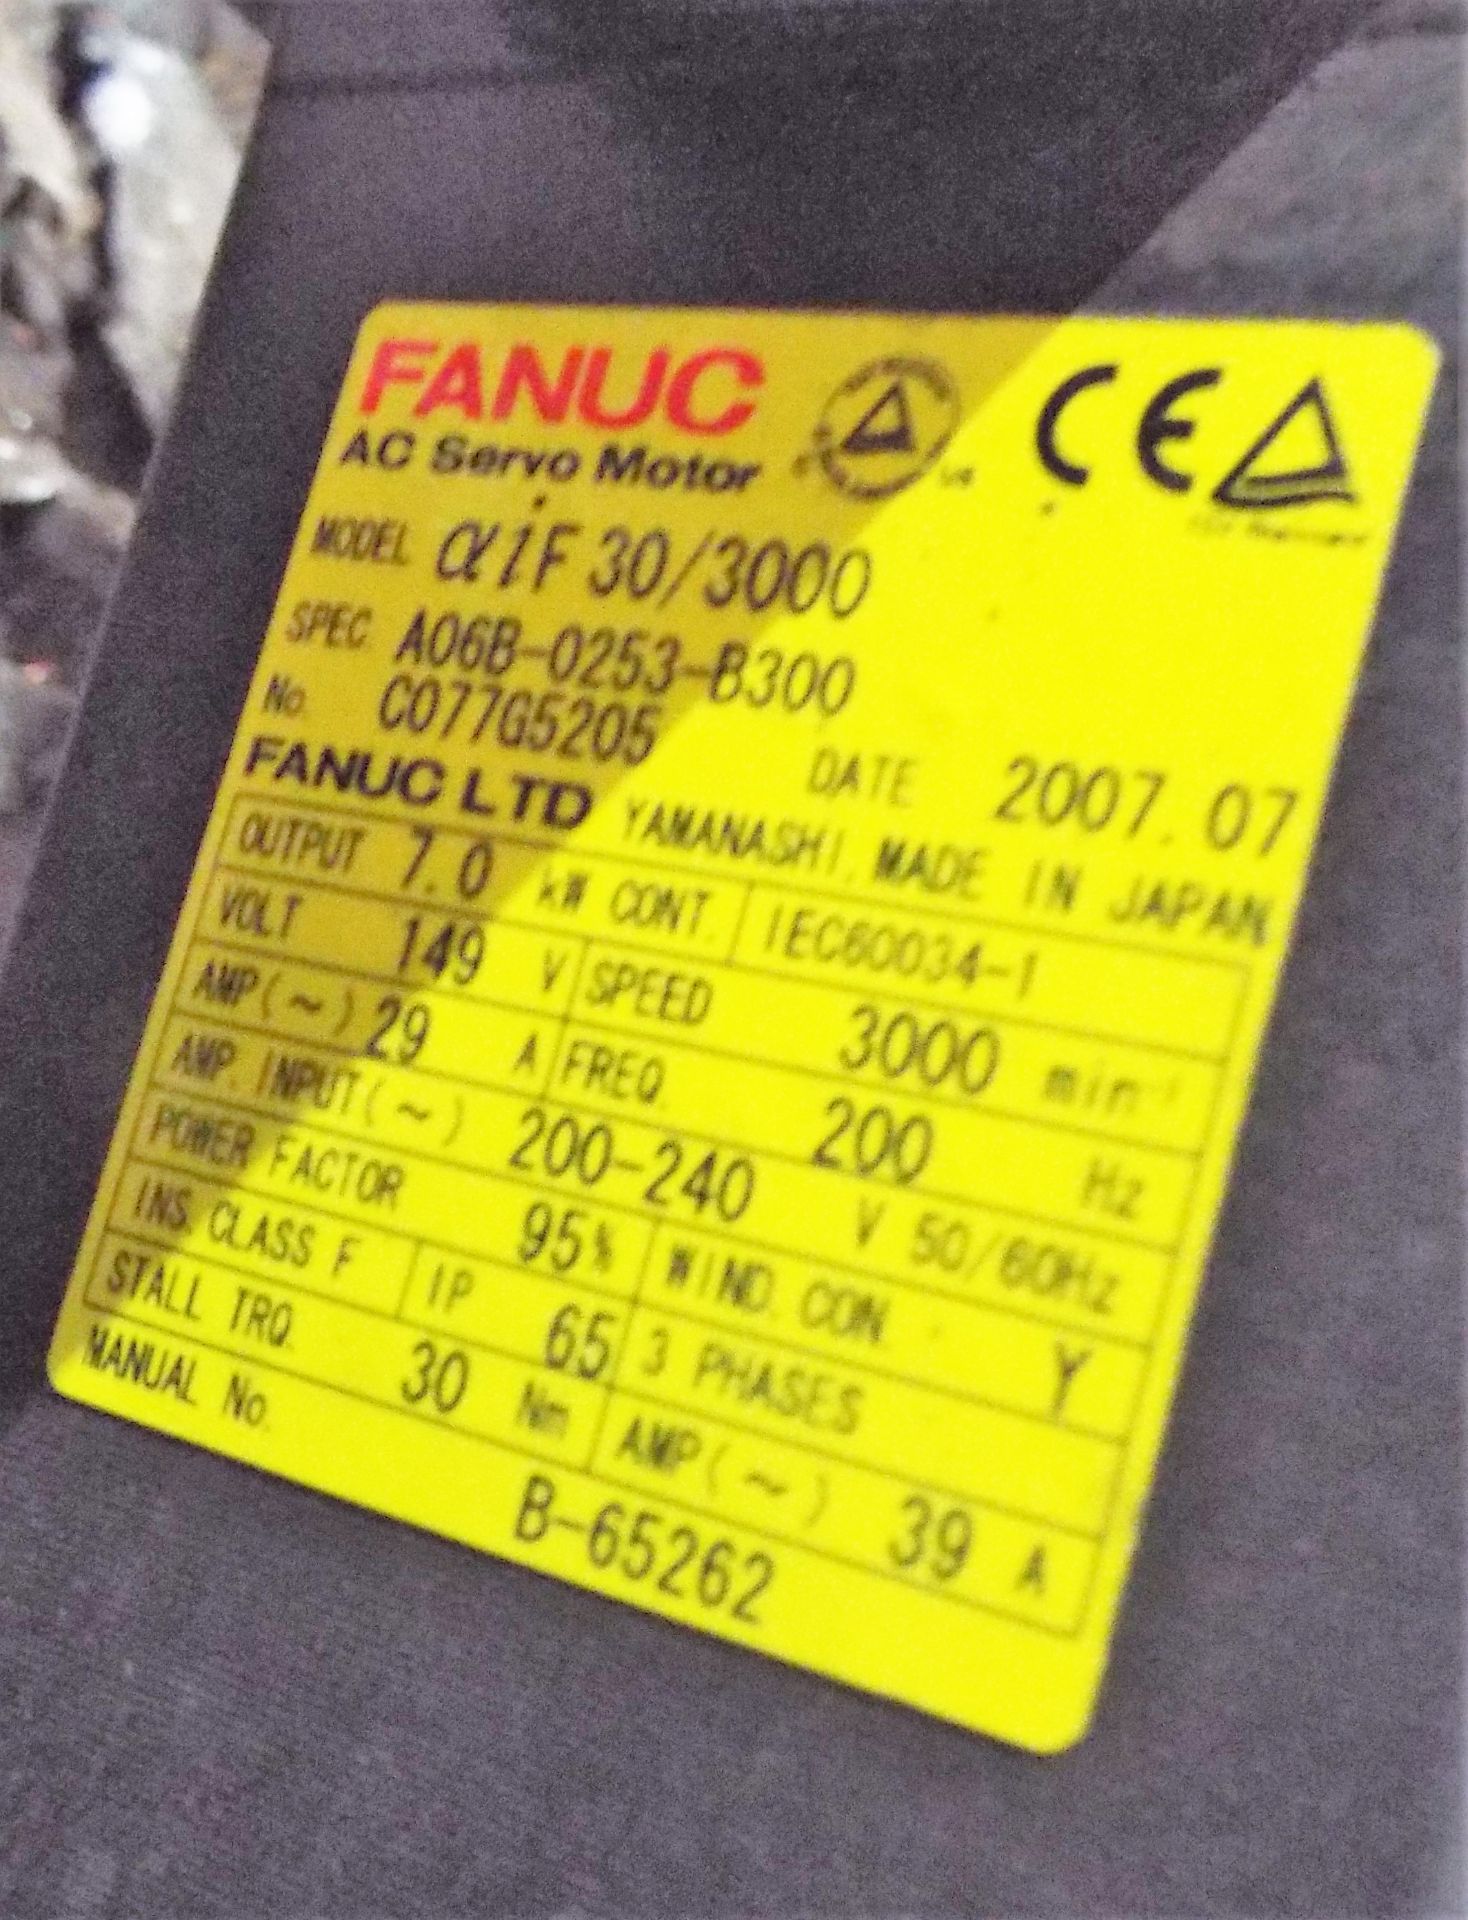 Fanuc Driven Parts Positioning Turntable.